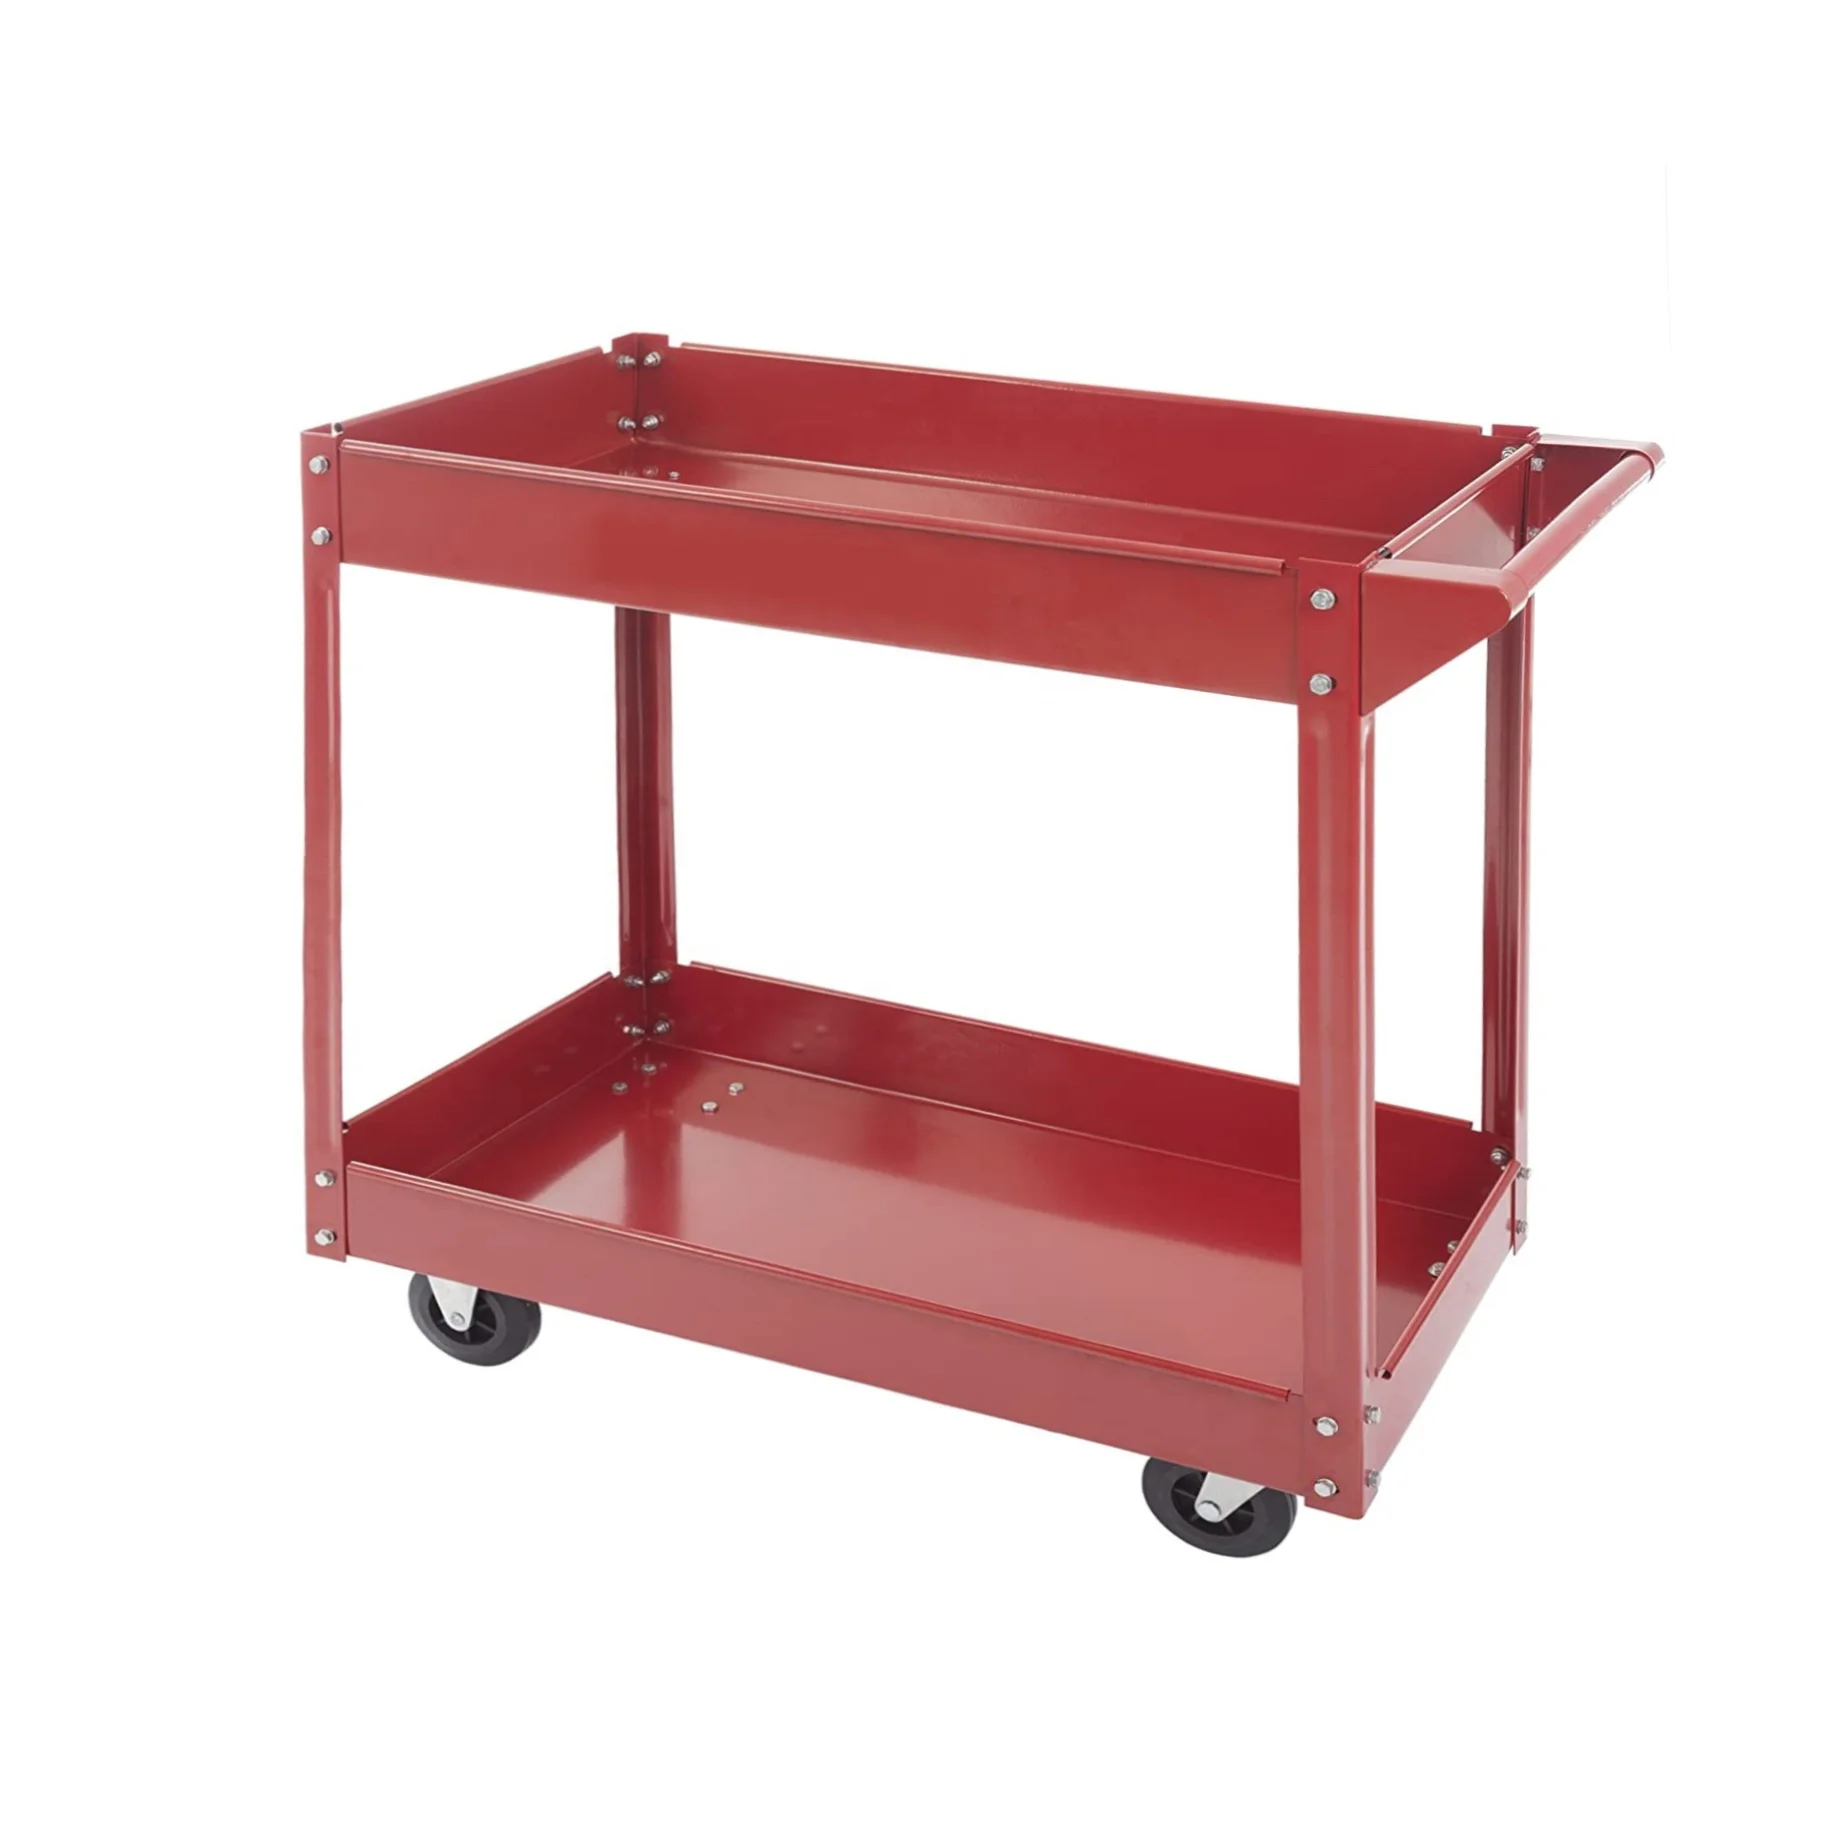 

3 Tier Steel Workshop Tool Cart Trolley Movable Heavy Duty Utility Service Tool Cart With Handle And Wheels For Workshop Garage